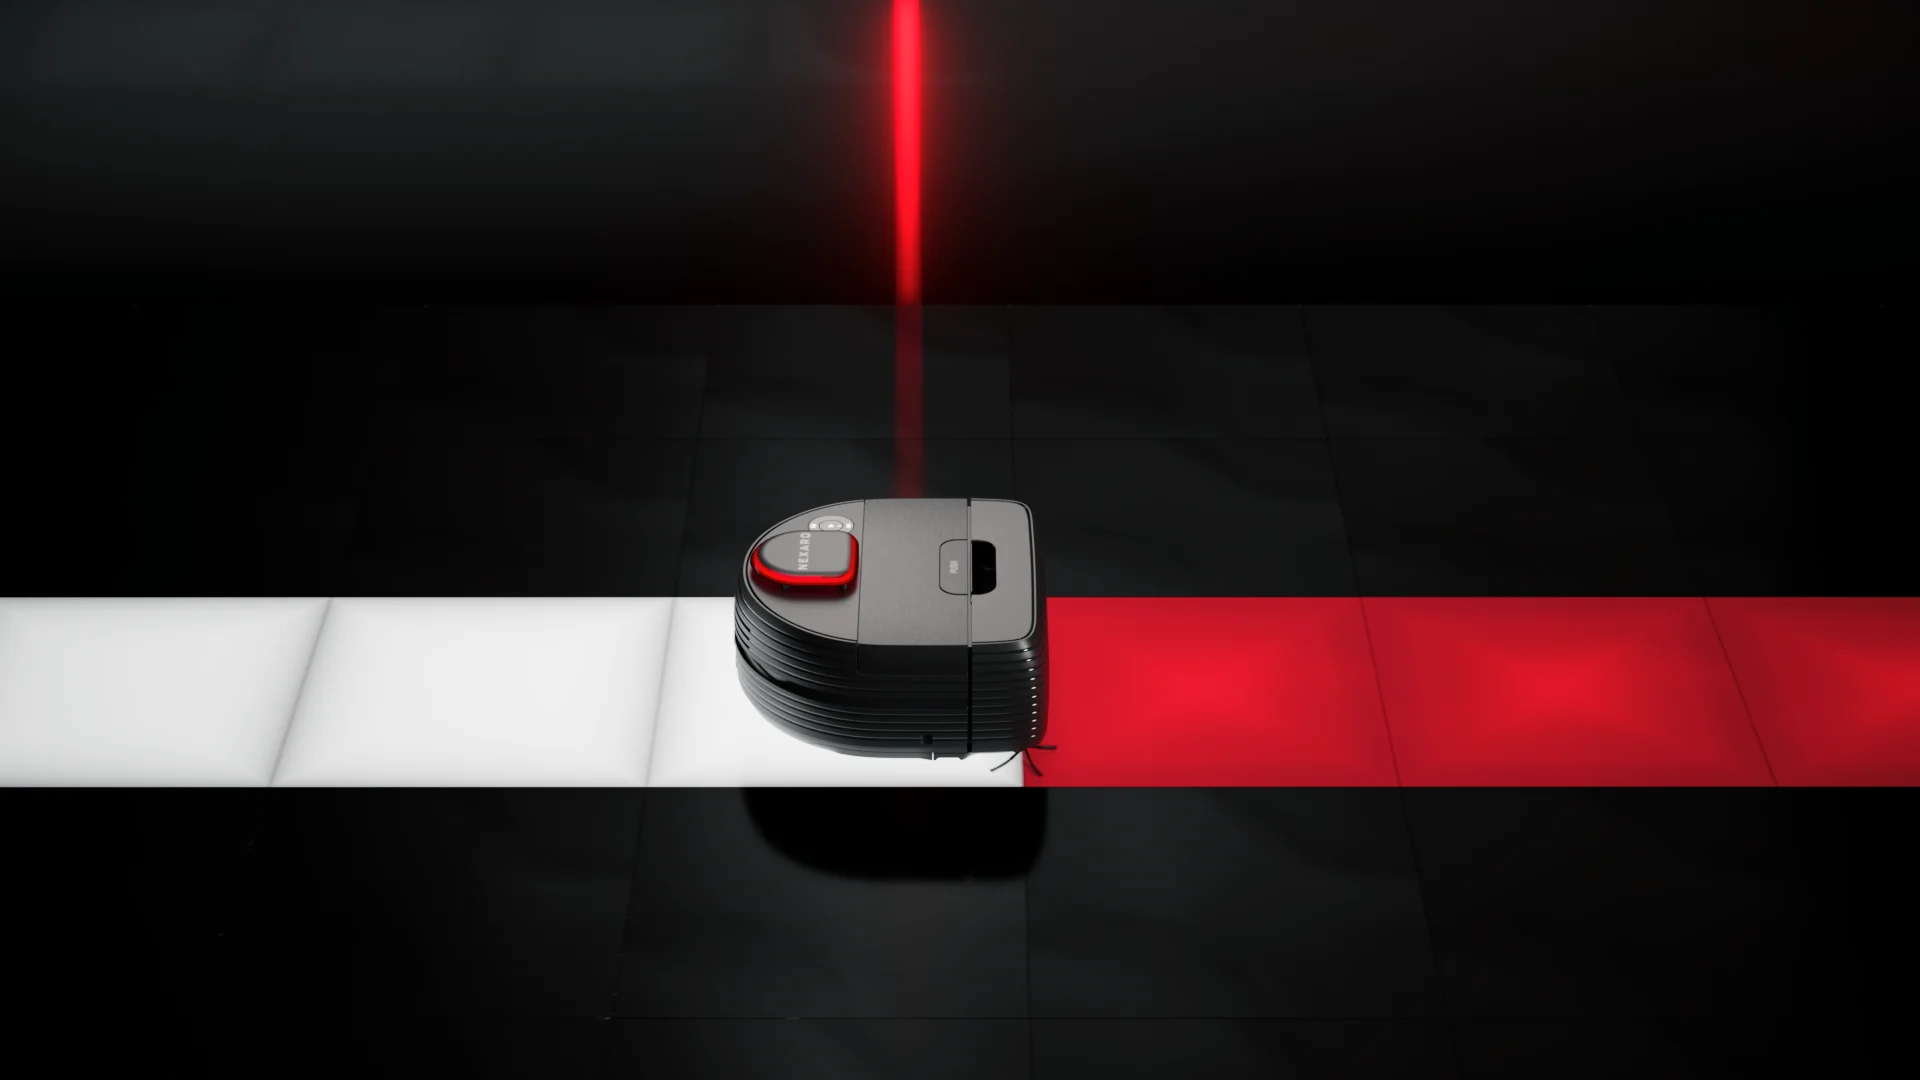 a black nexaro vacuum cleaner robot in a top view on a tiled red, white and black floor 